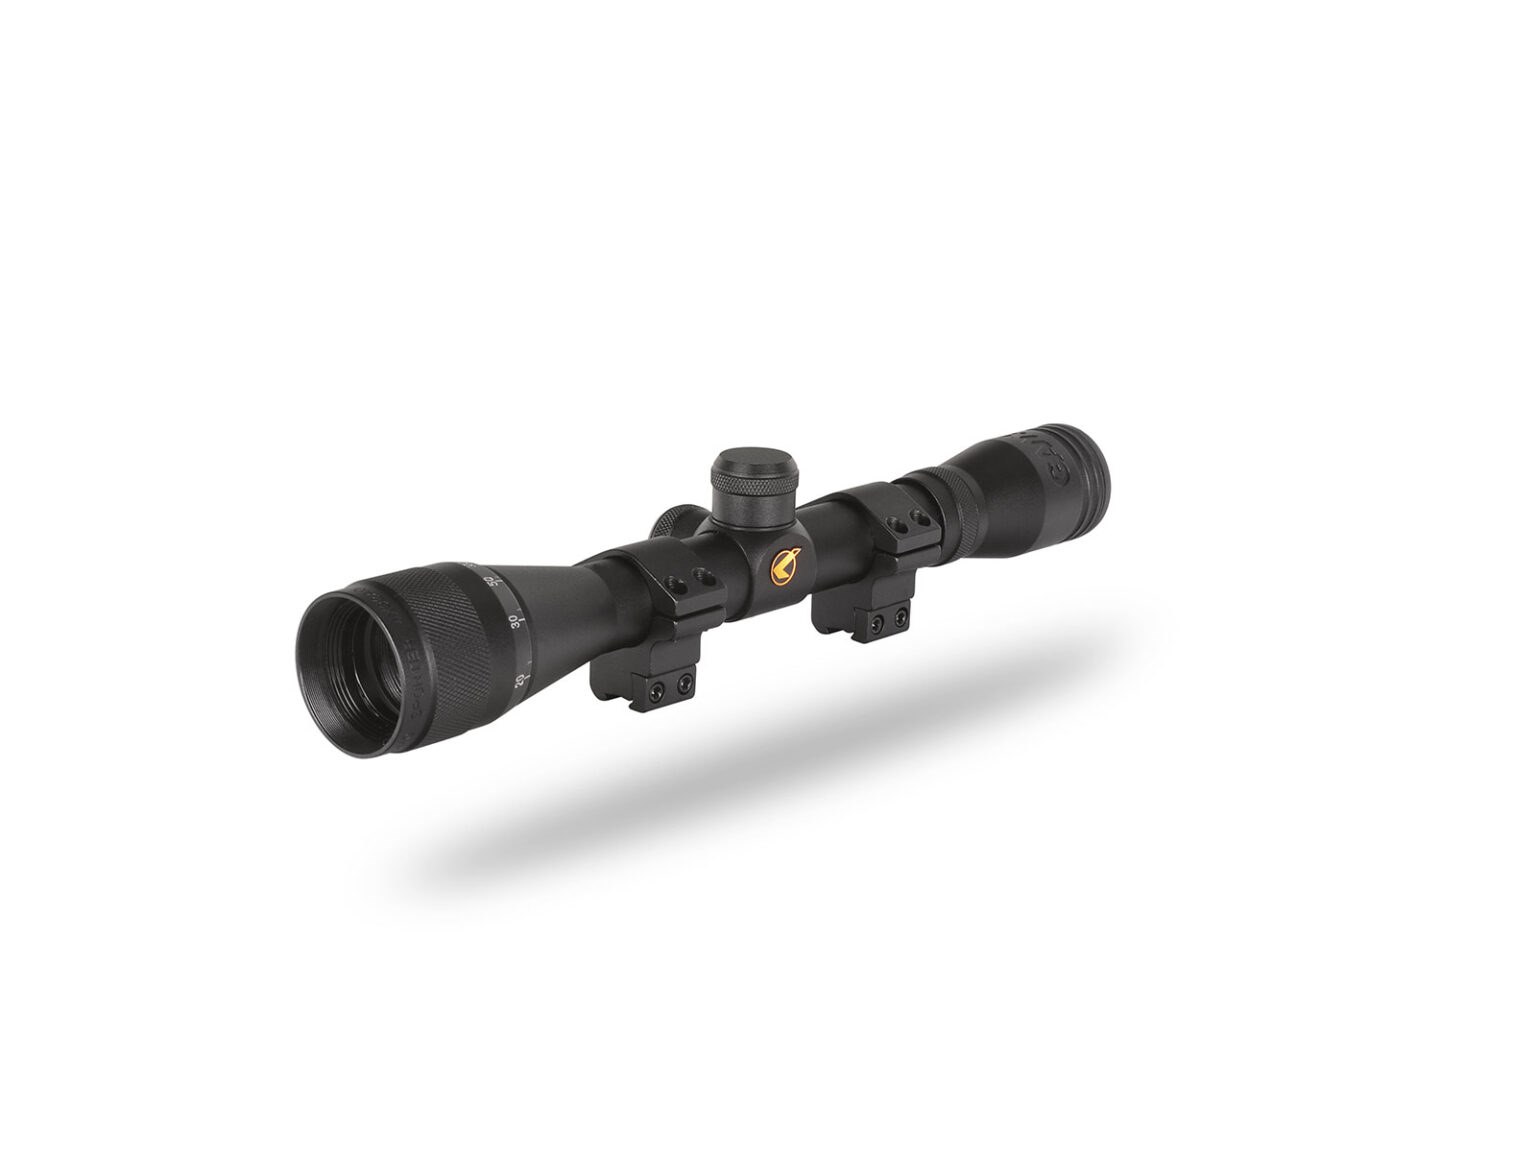 Gamo Scope 4x32wr Adjustable Objective Compact Air Rifle Scope